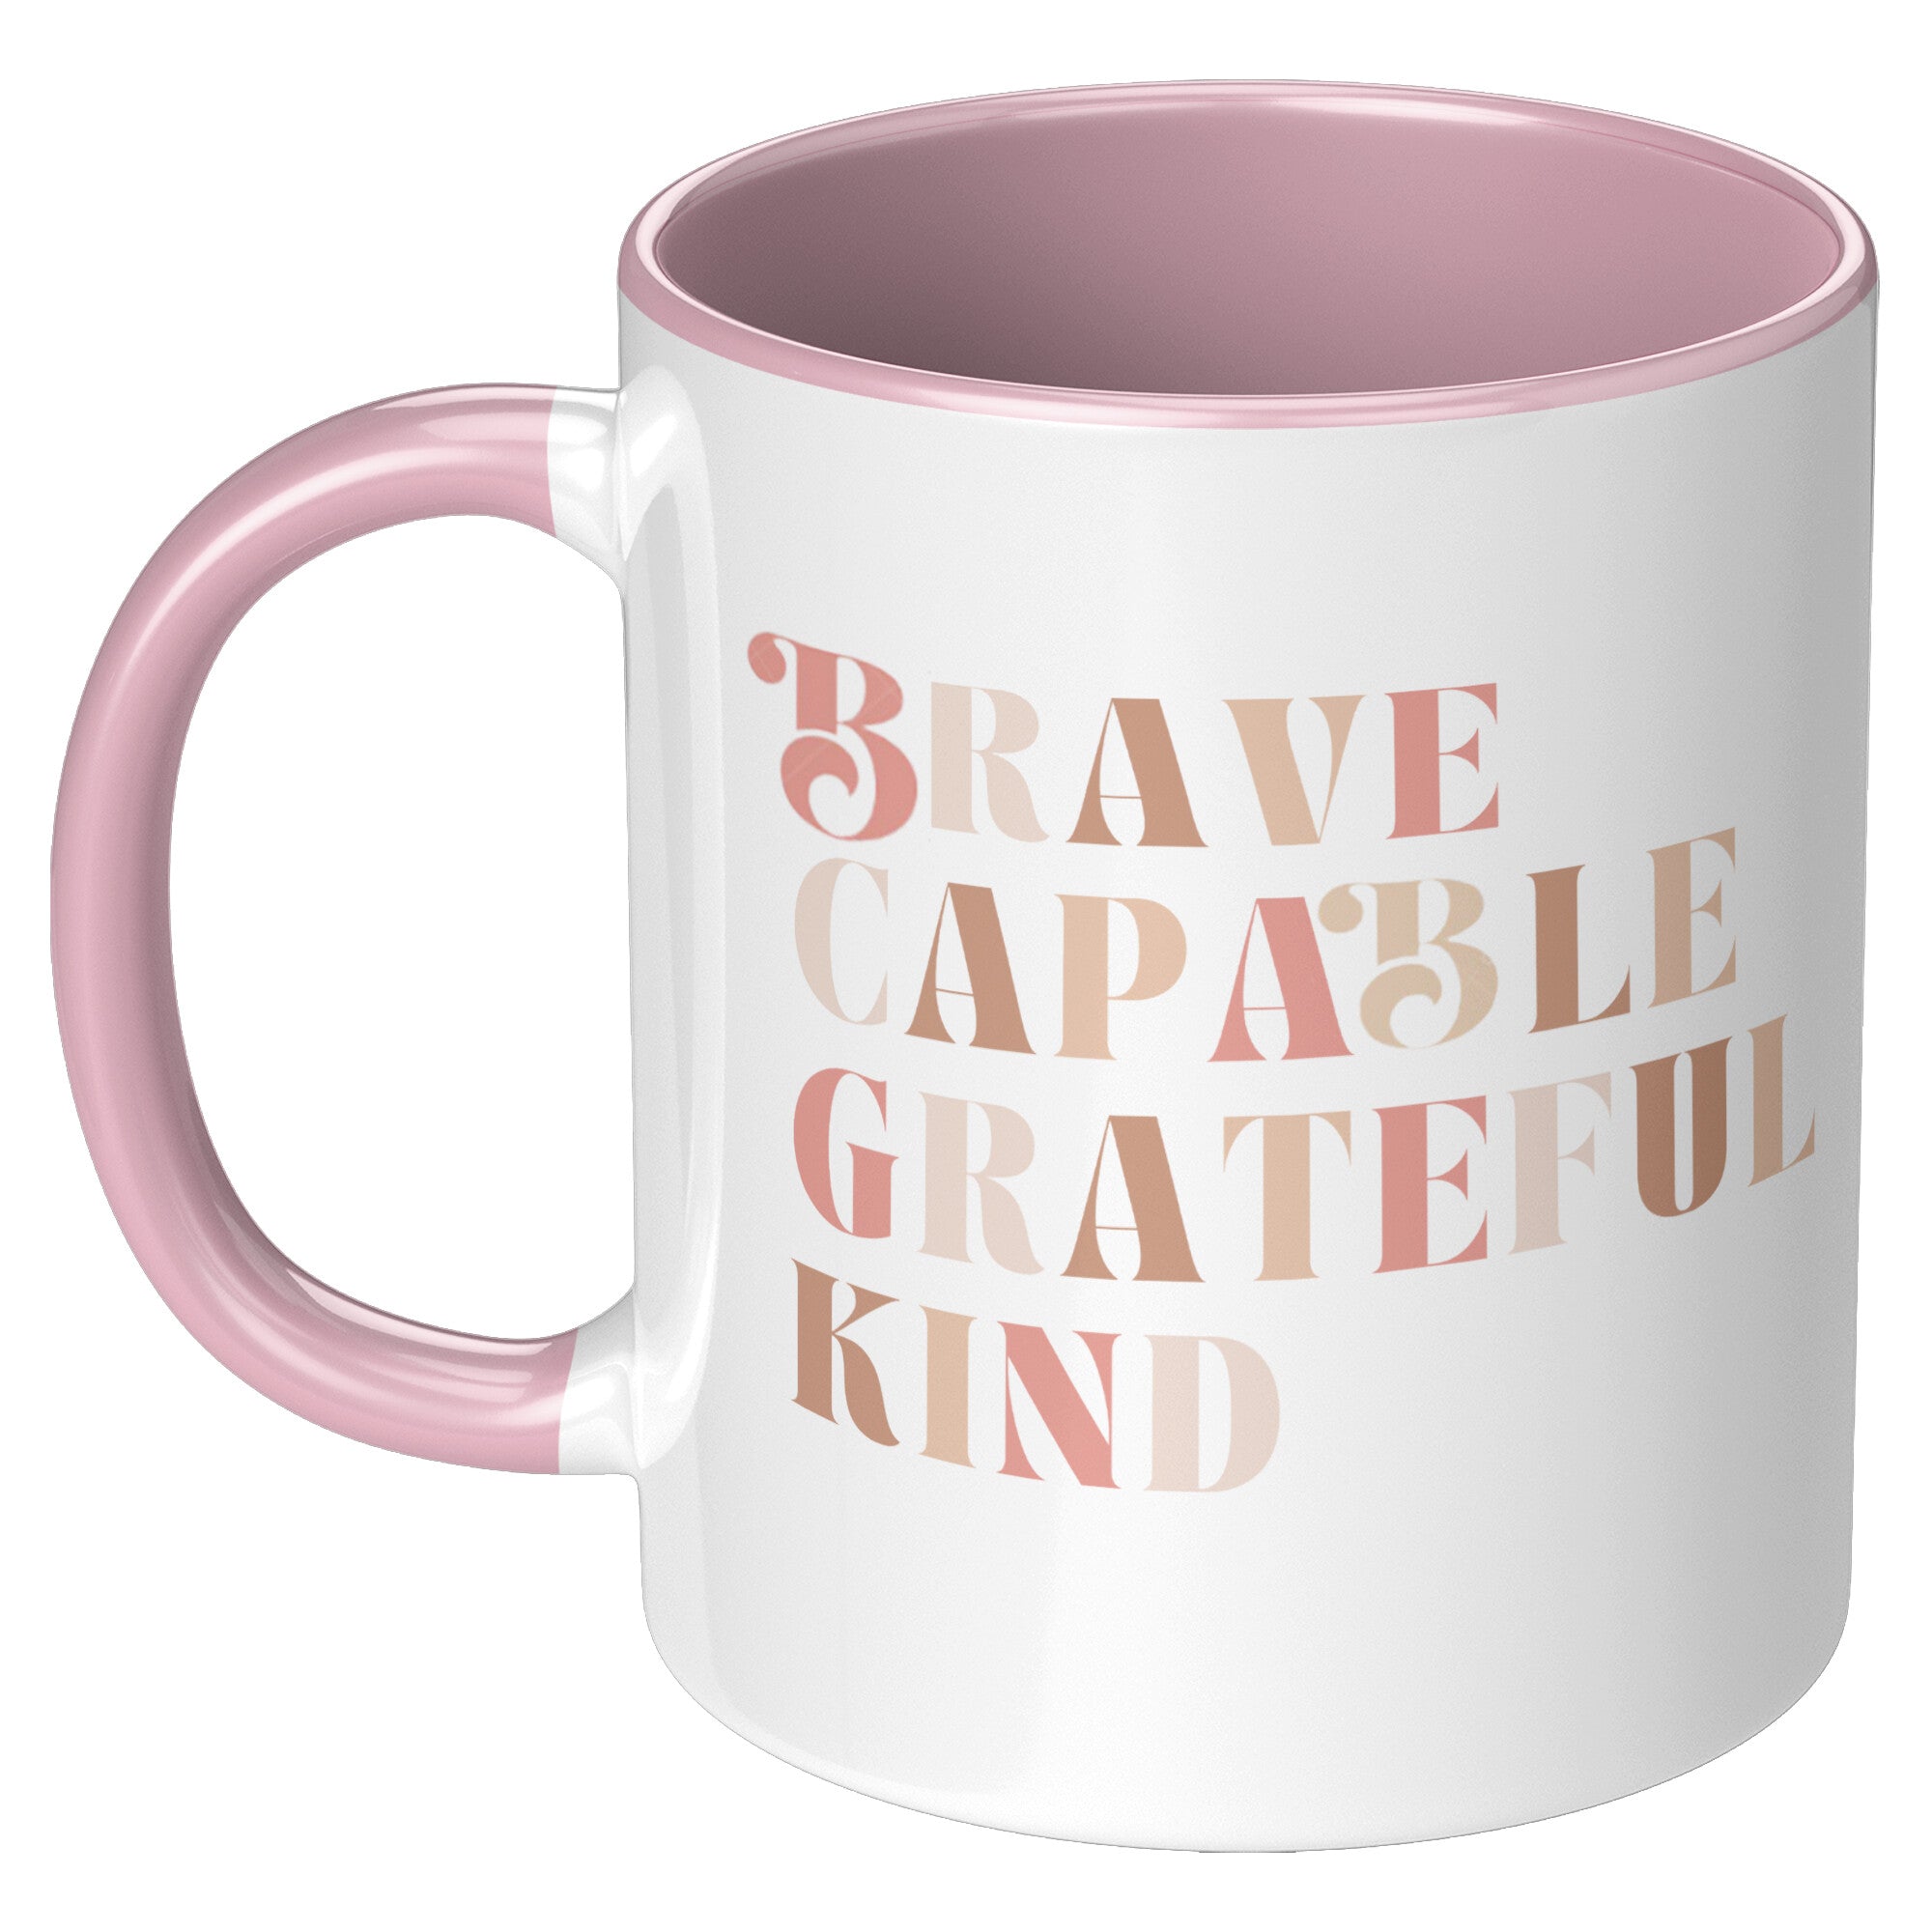 Beautiful, Capable, Grateful, Kind 11oz. Accent Coffee Mug - The Kindness Cause gifts for women that give back